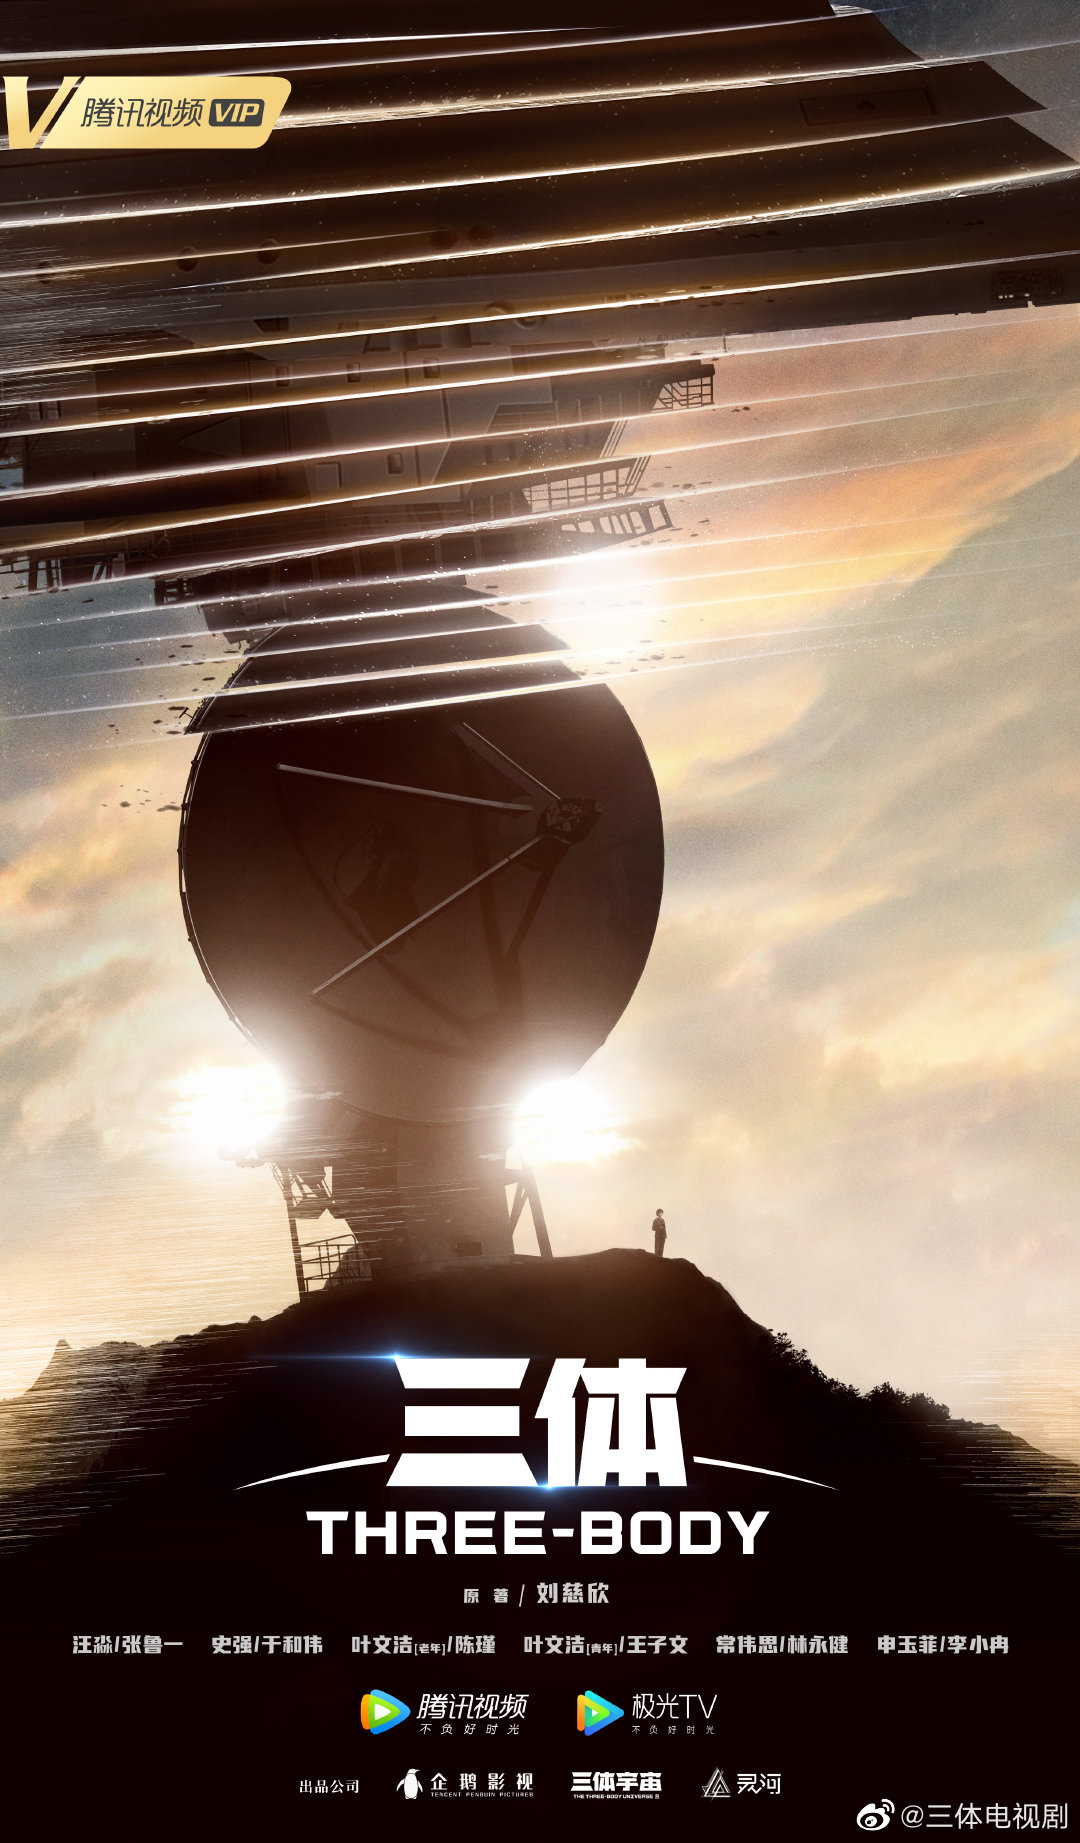 Tencent Video will launch “The Three-Body Problem” TV series